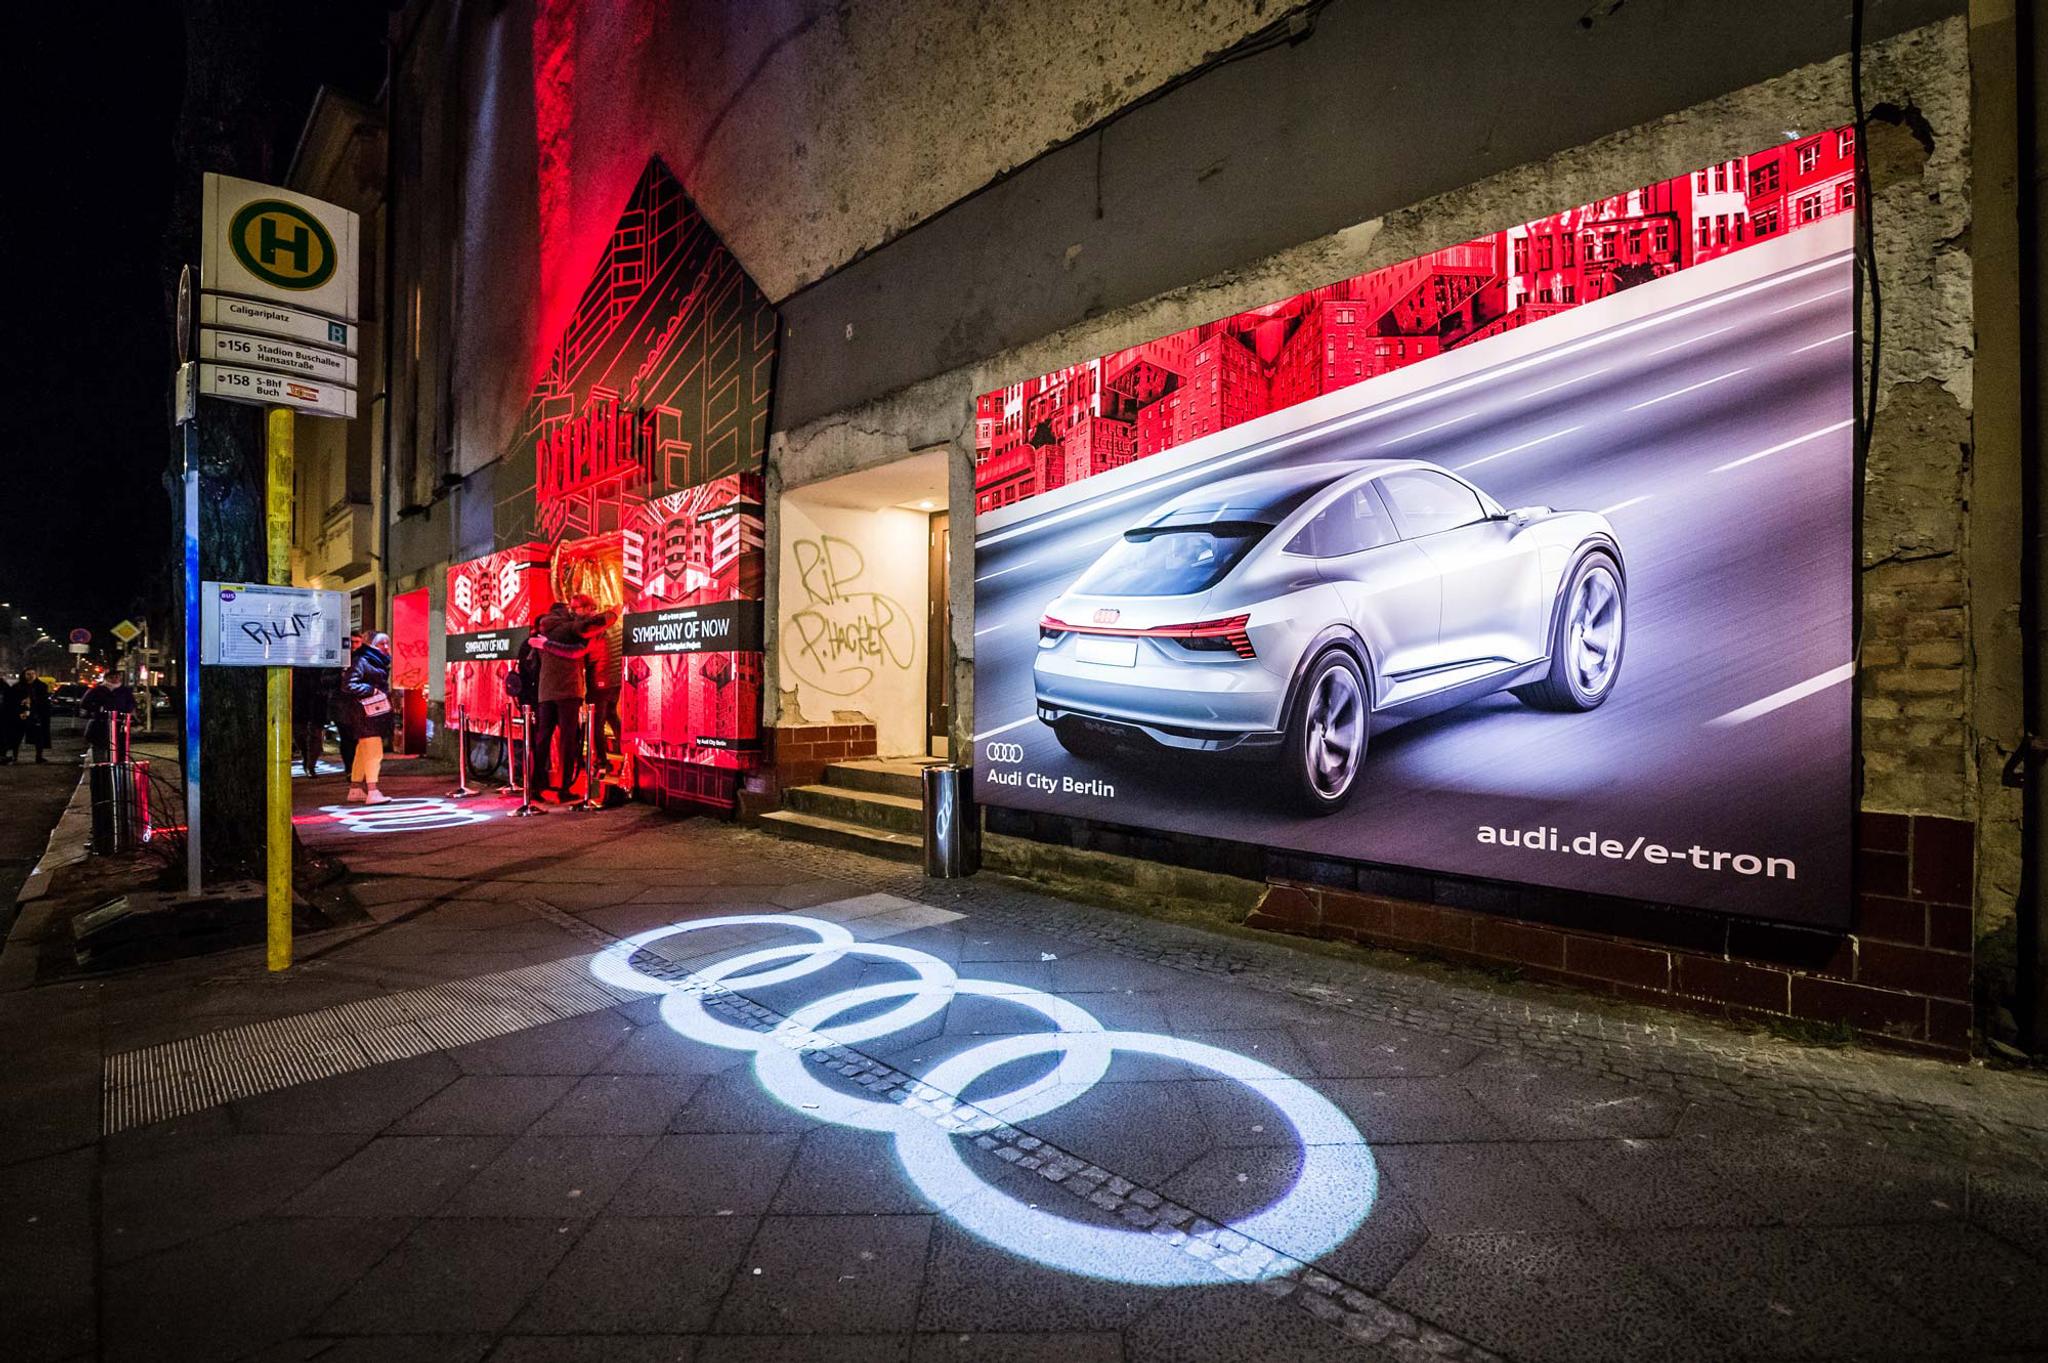 The Audi logo is projected onto the sidewalk in front of an Audi ad in front of the Symphony of Now screening.